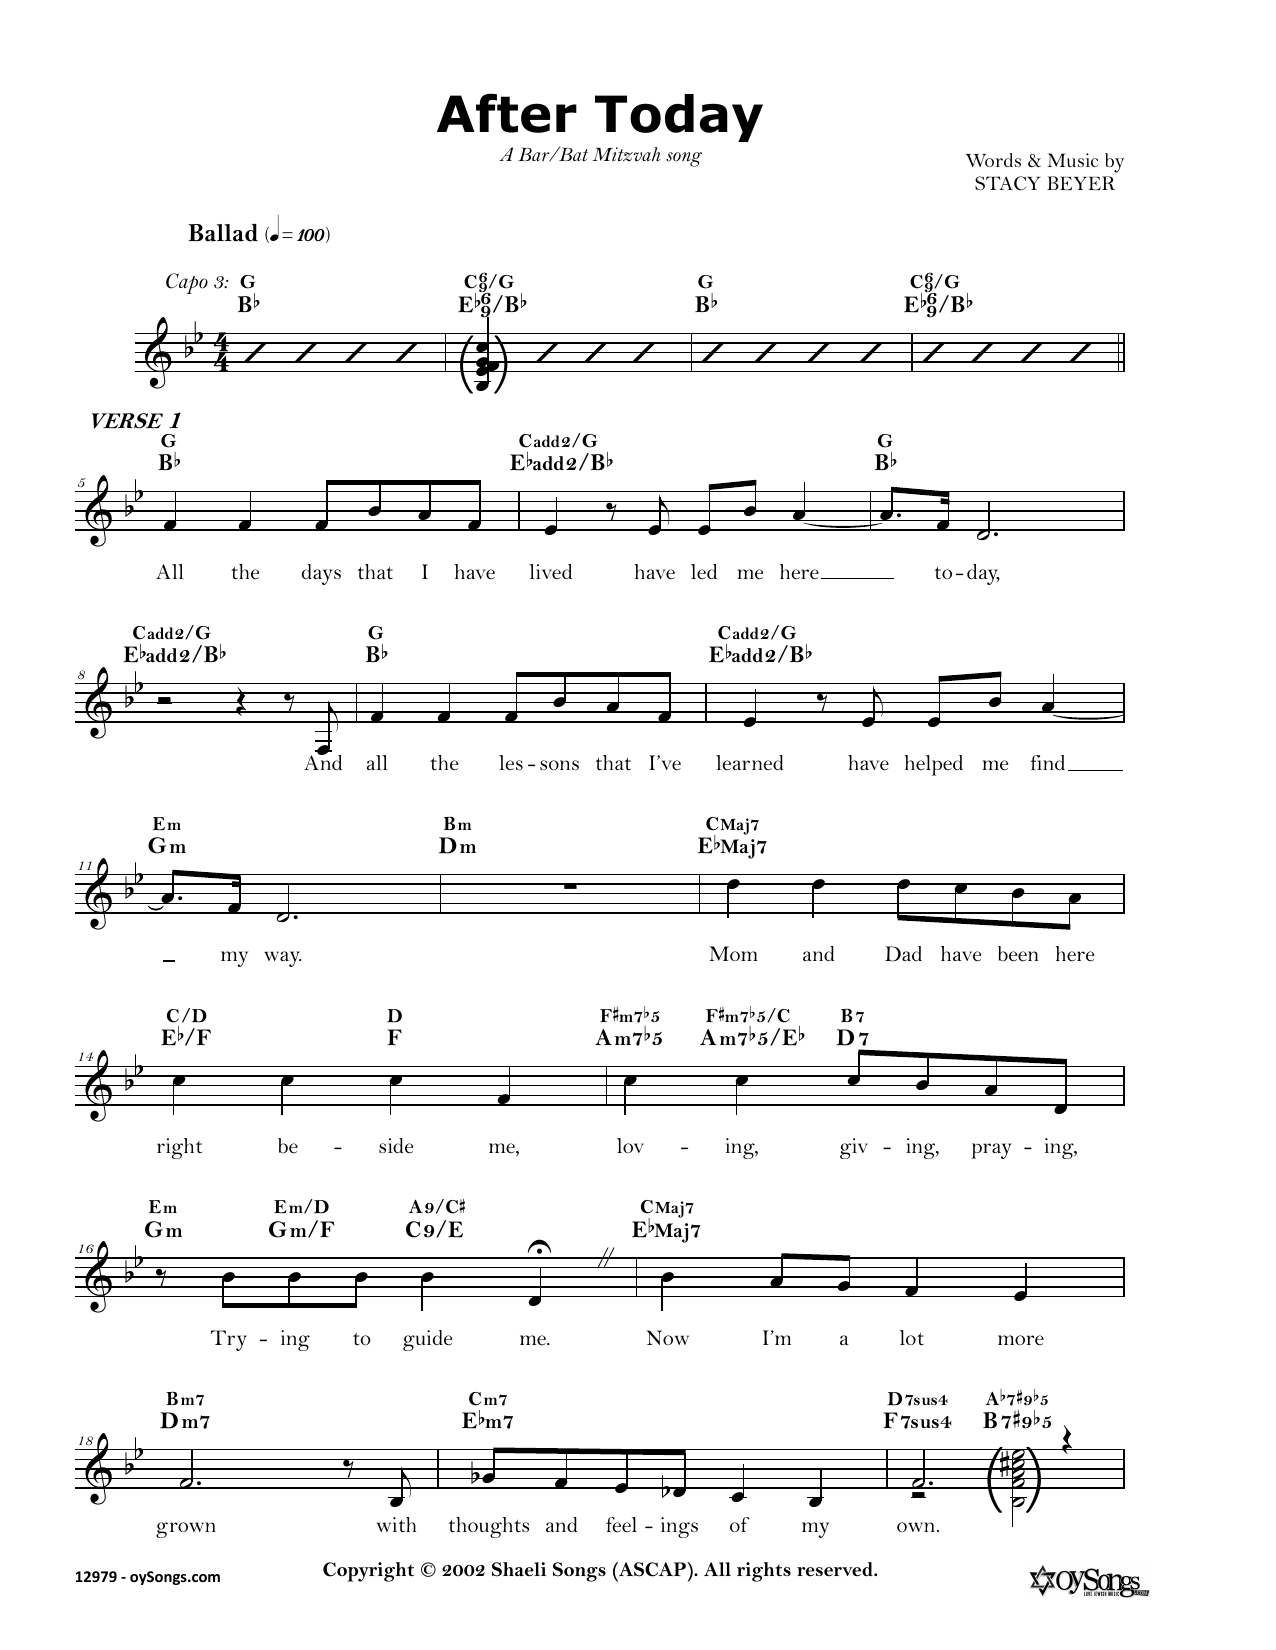 Download Stacy Beyer After Today Sheet Music